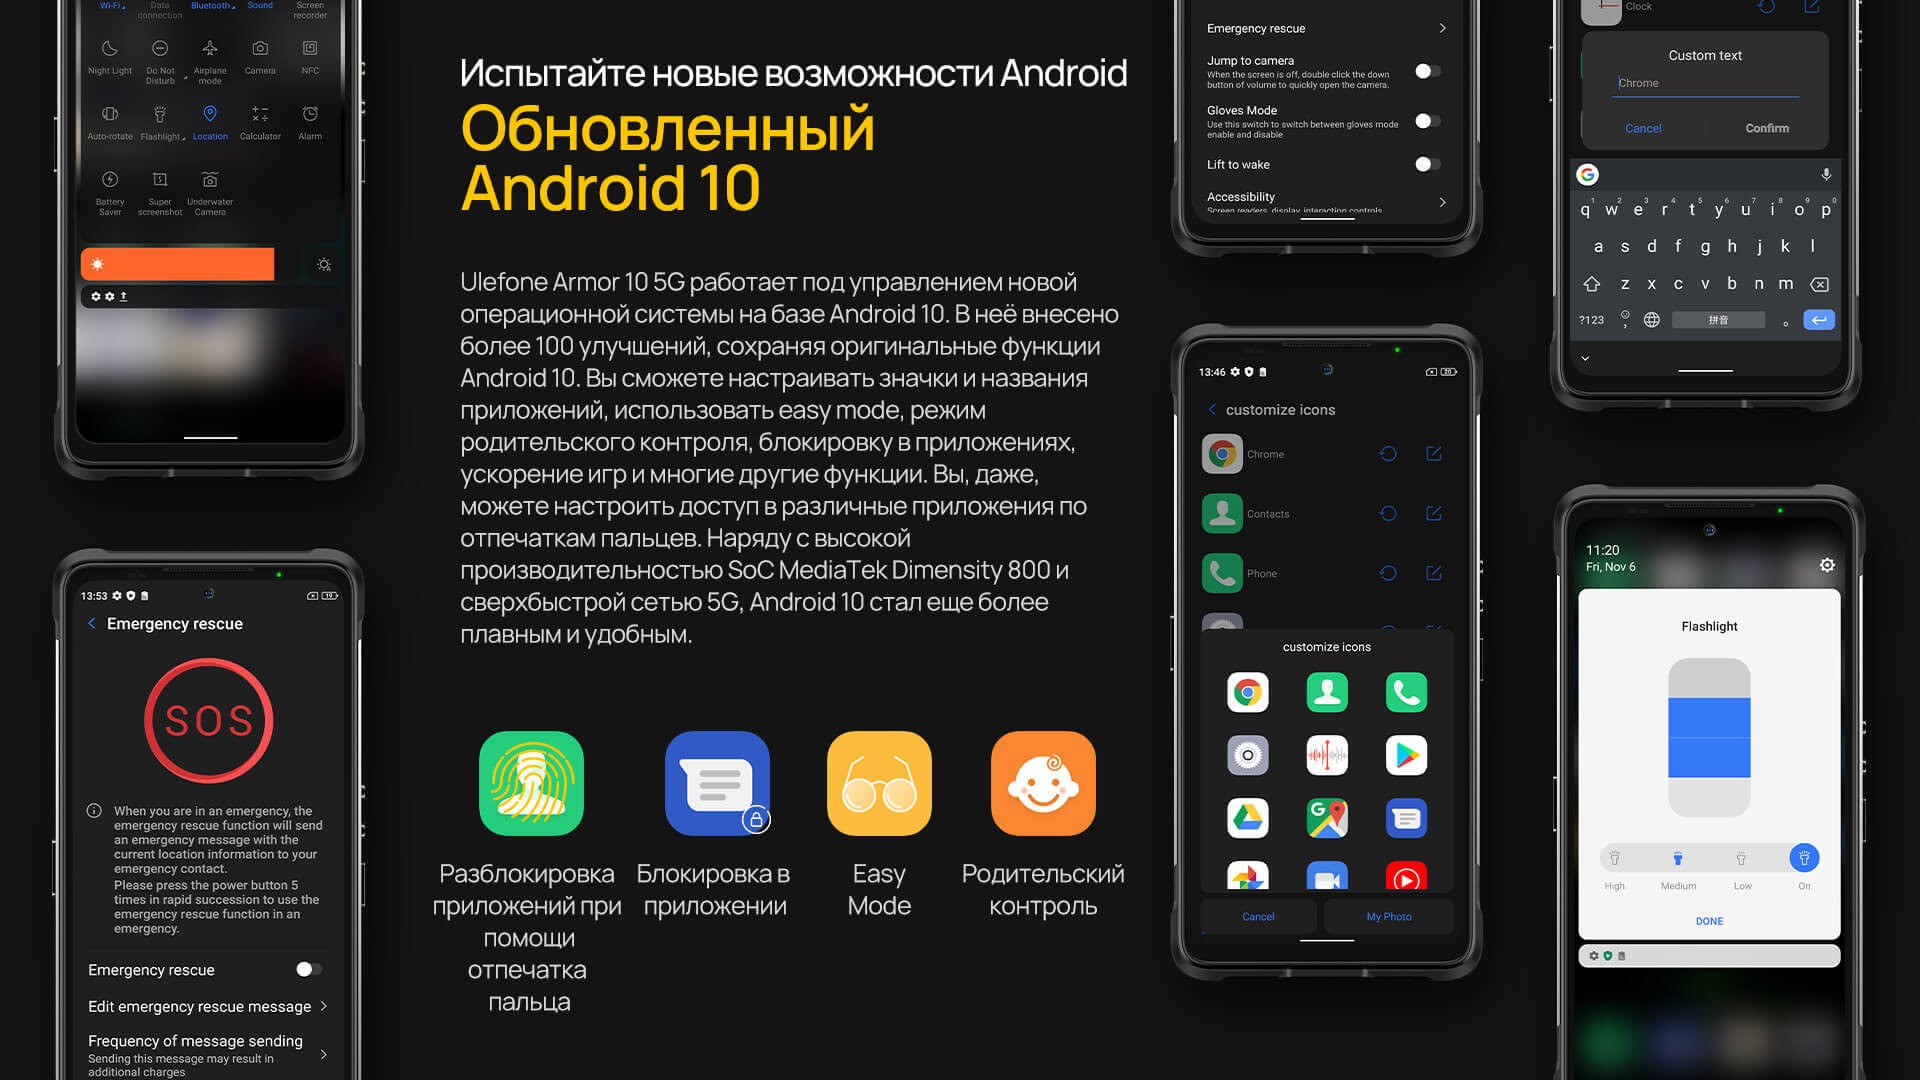 Ulefone Armor 10 - Android 10